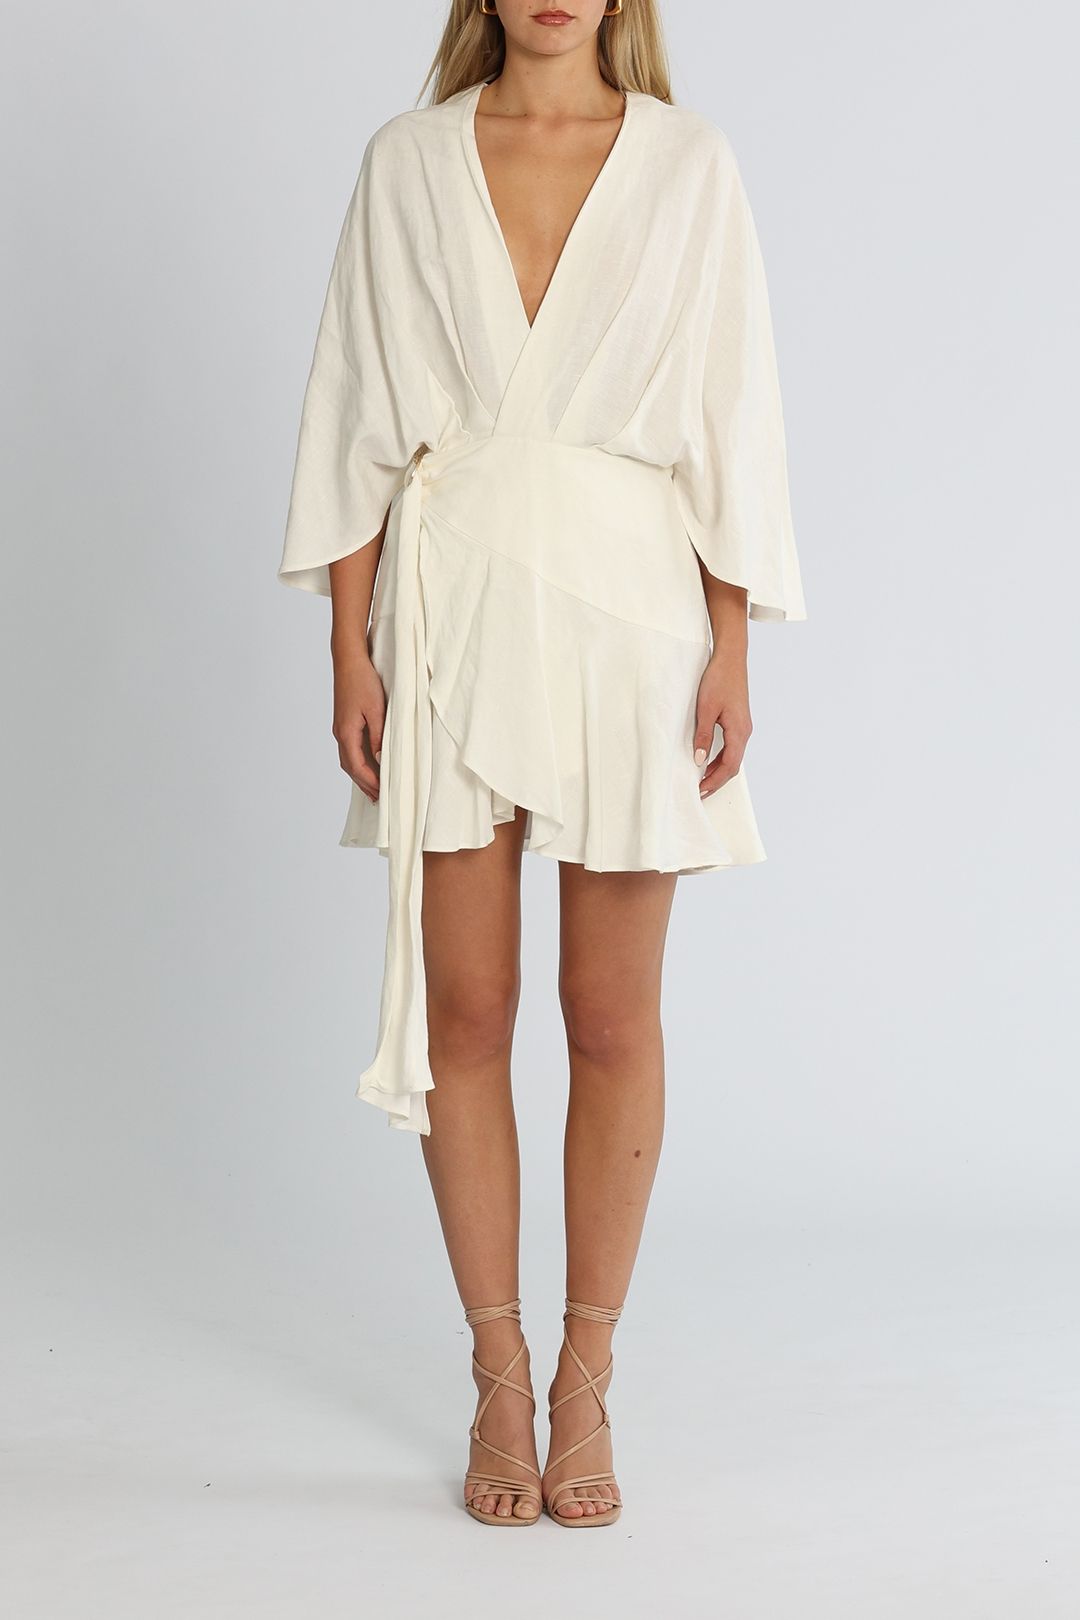 Significant Other Olivia Dress Ivory